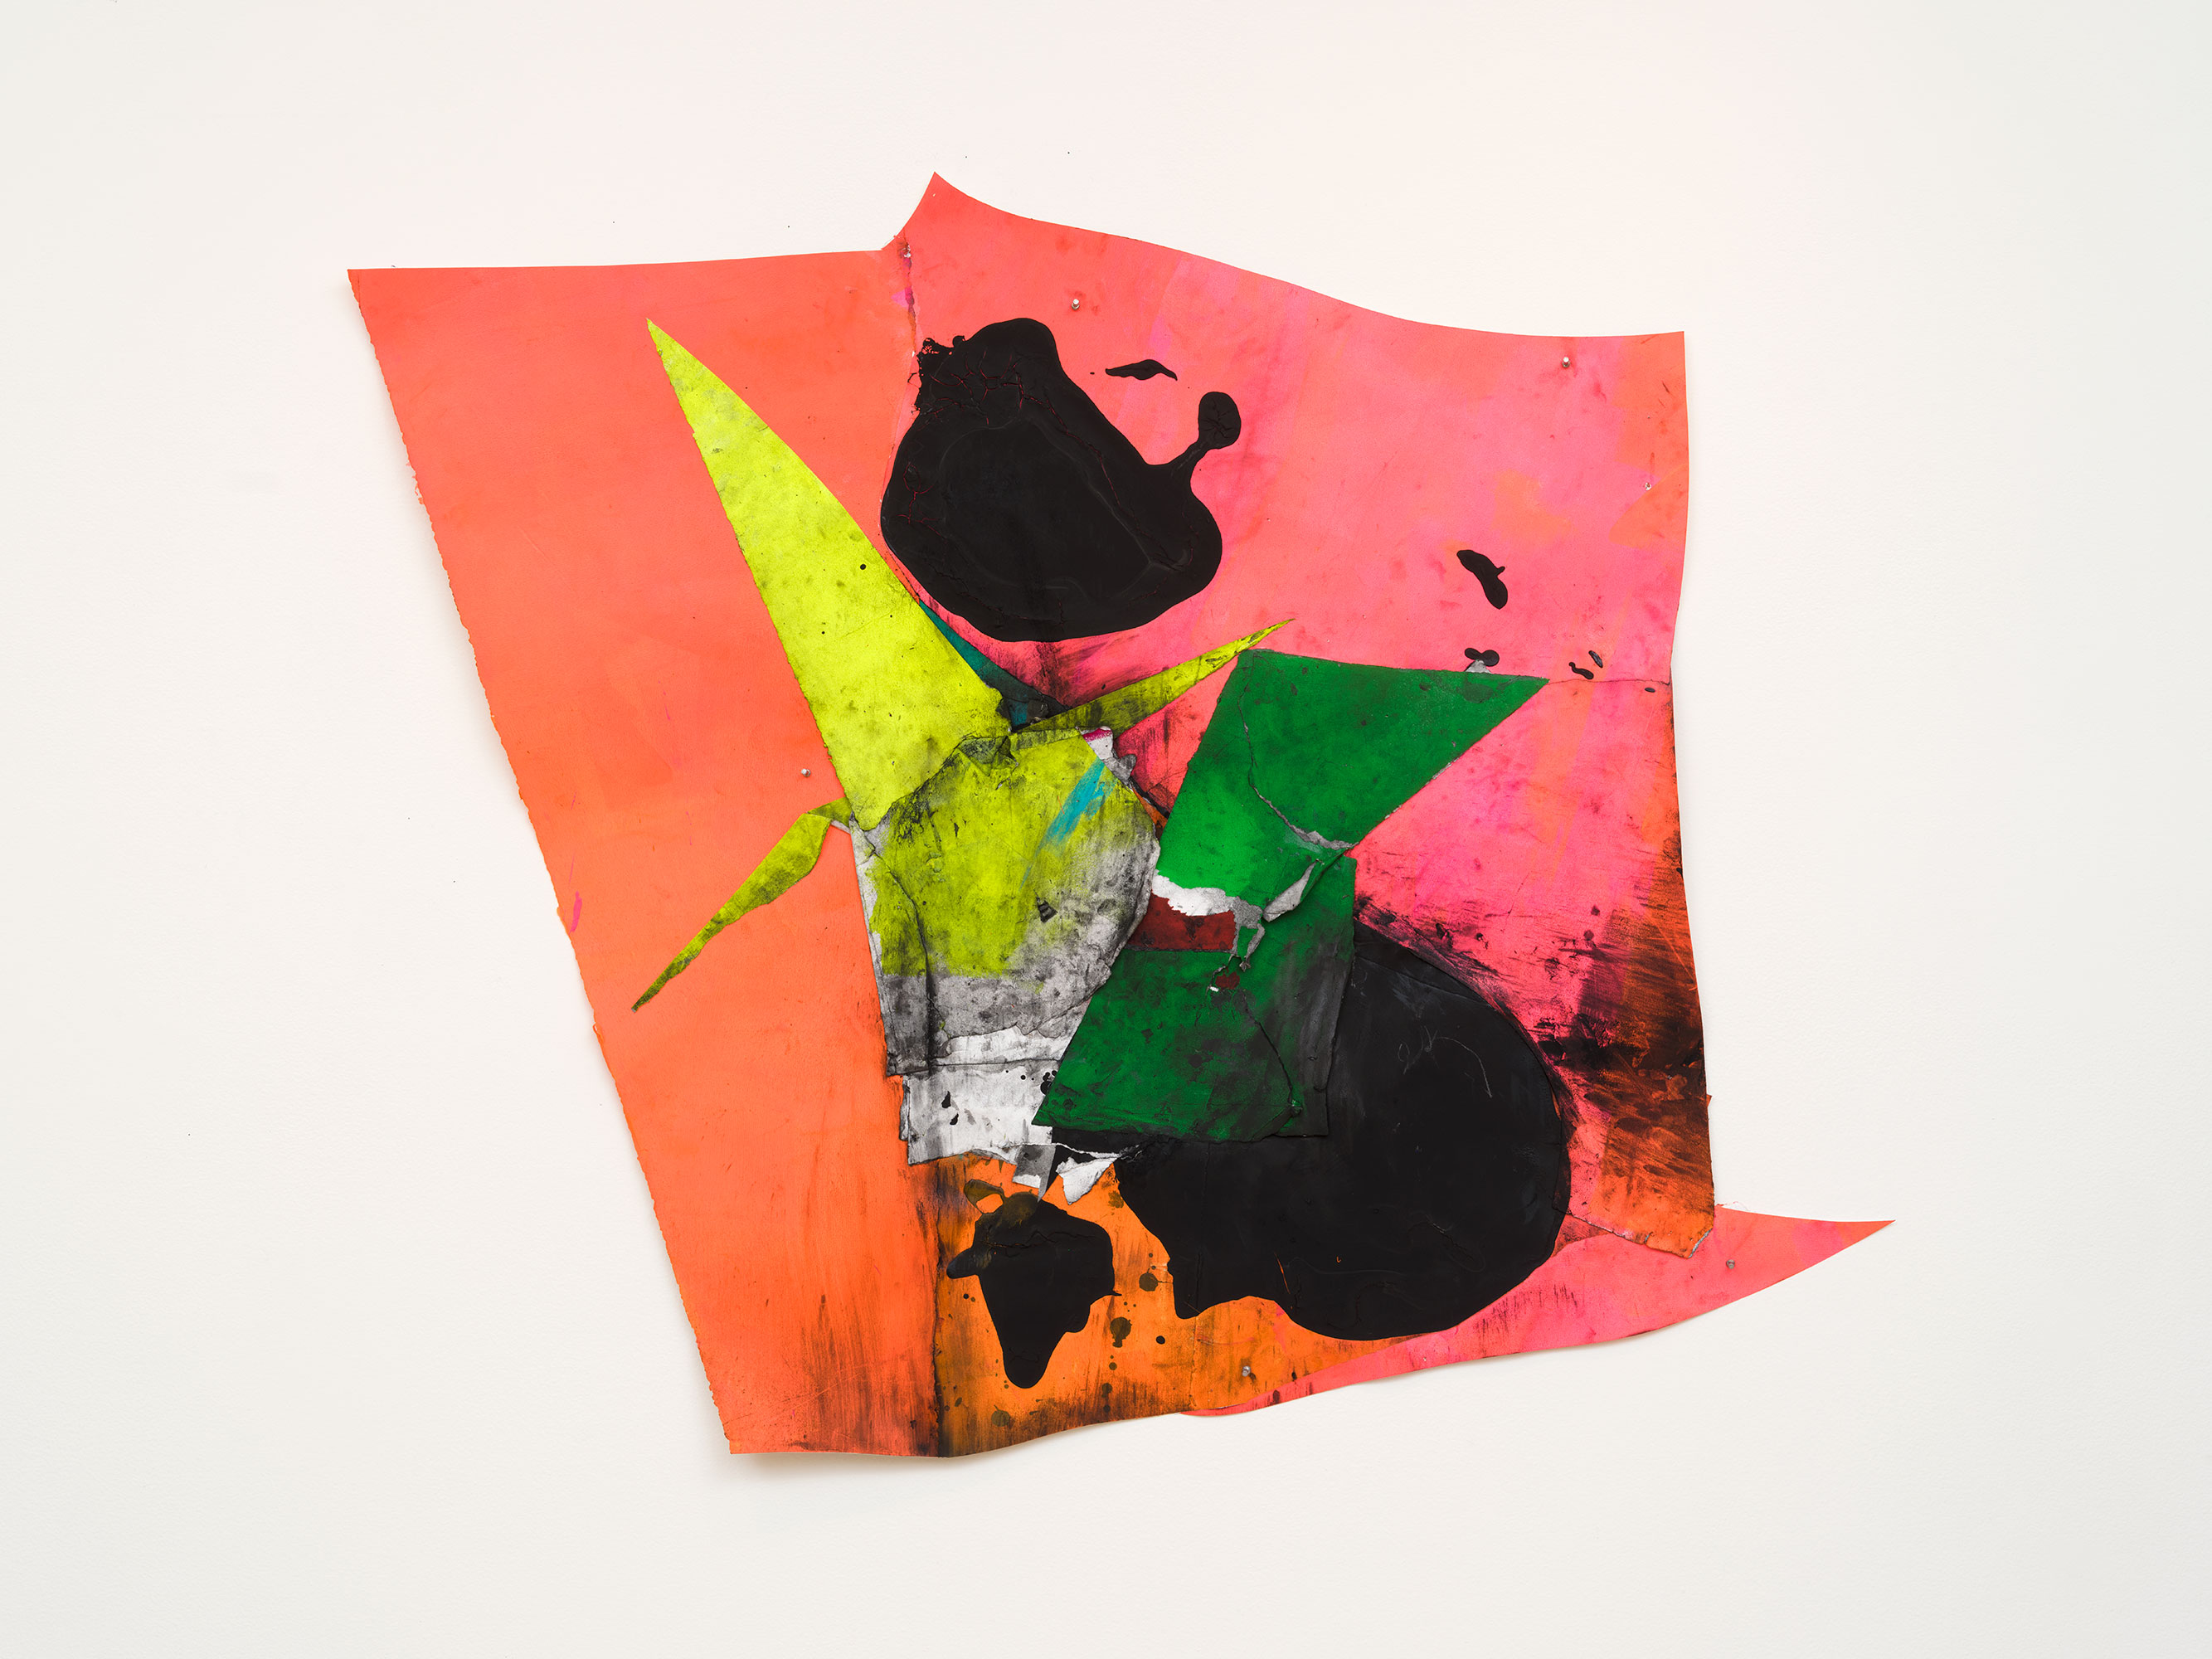 Wesley Kimler / 
Hot Pink Fox, 2022 / 
vinyl acrylic, charcoal, and graphite on rag paper / 
45 x 53 in. (114.3 x 134.6 cm)